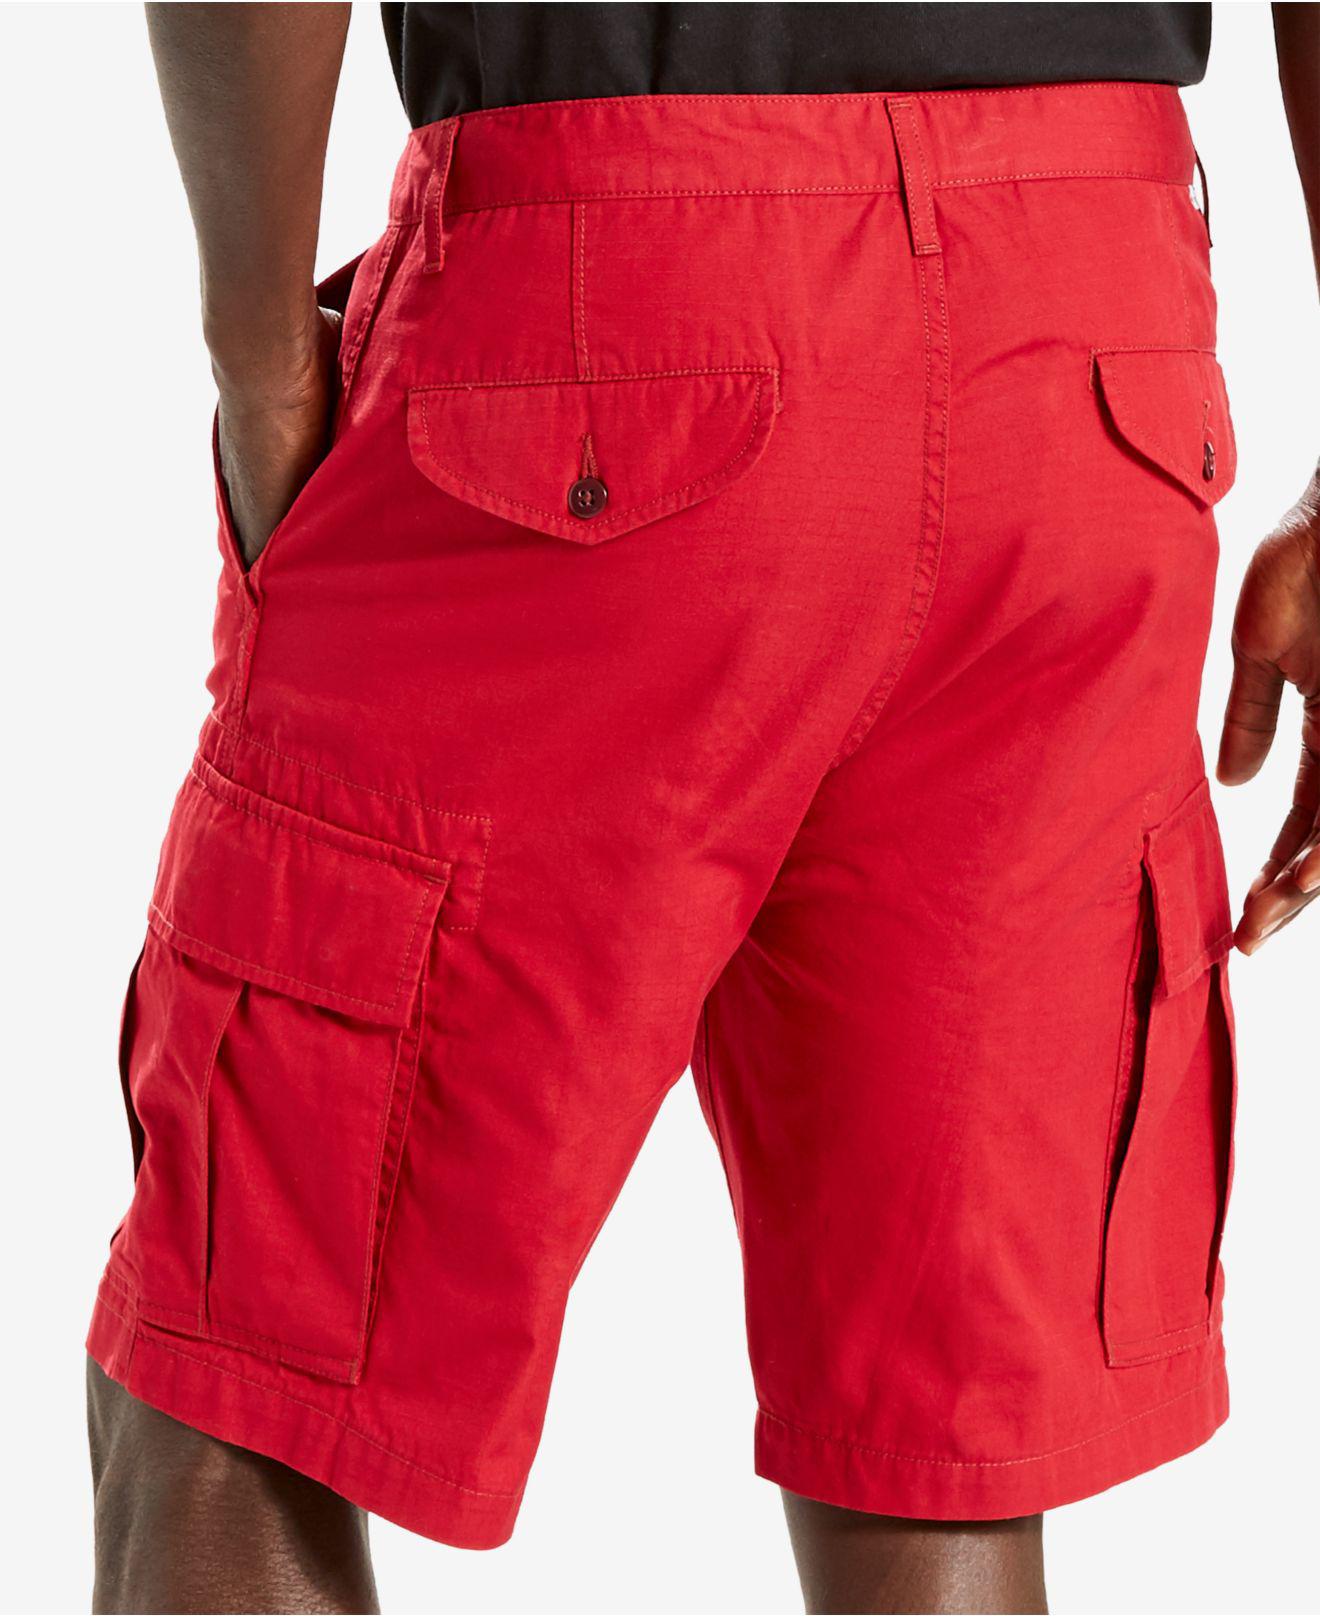 Lyst - Levi's Carrier Cargo Shorts in Red for Men